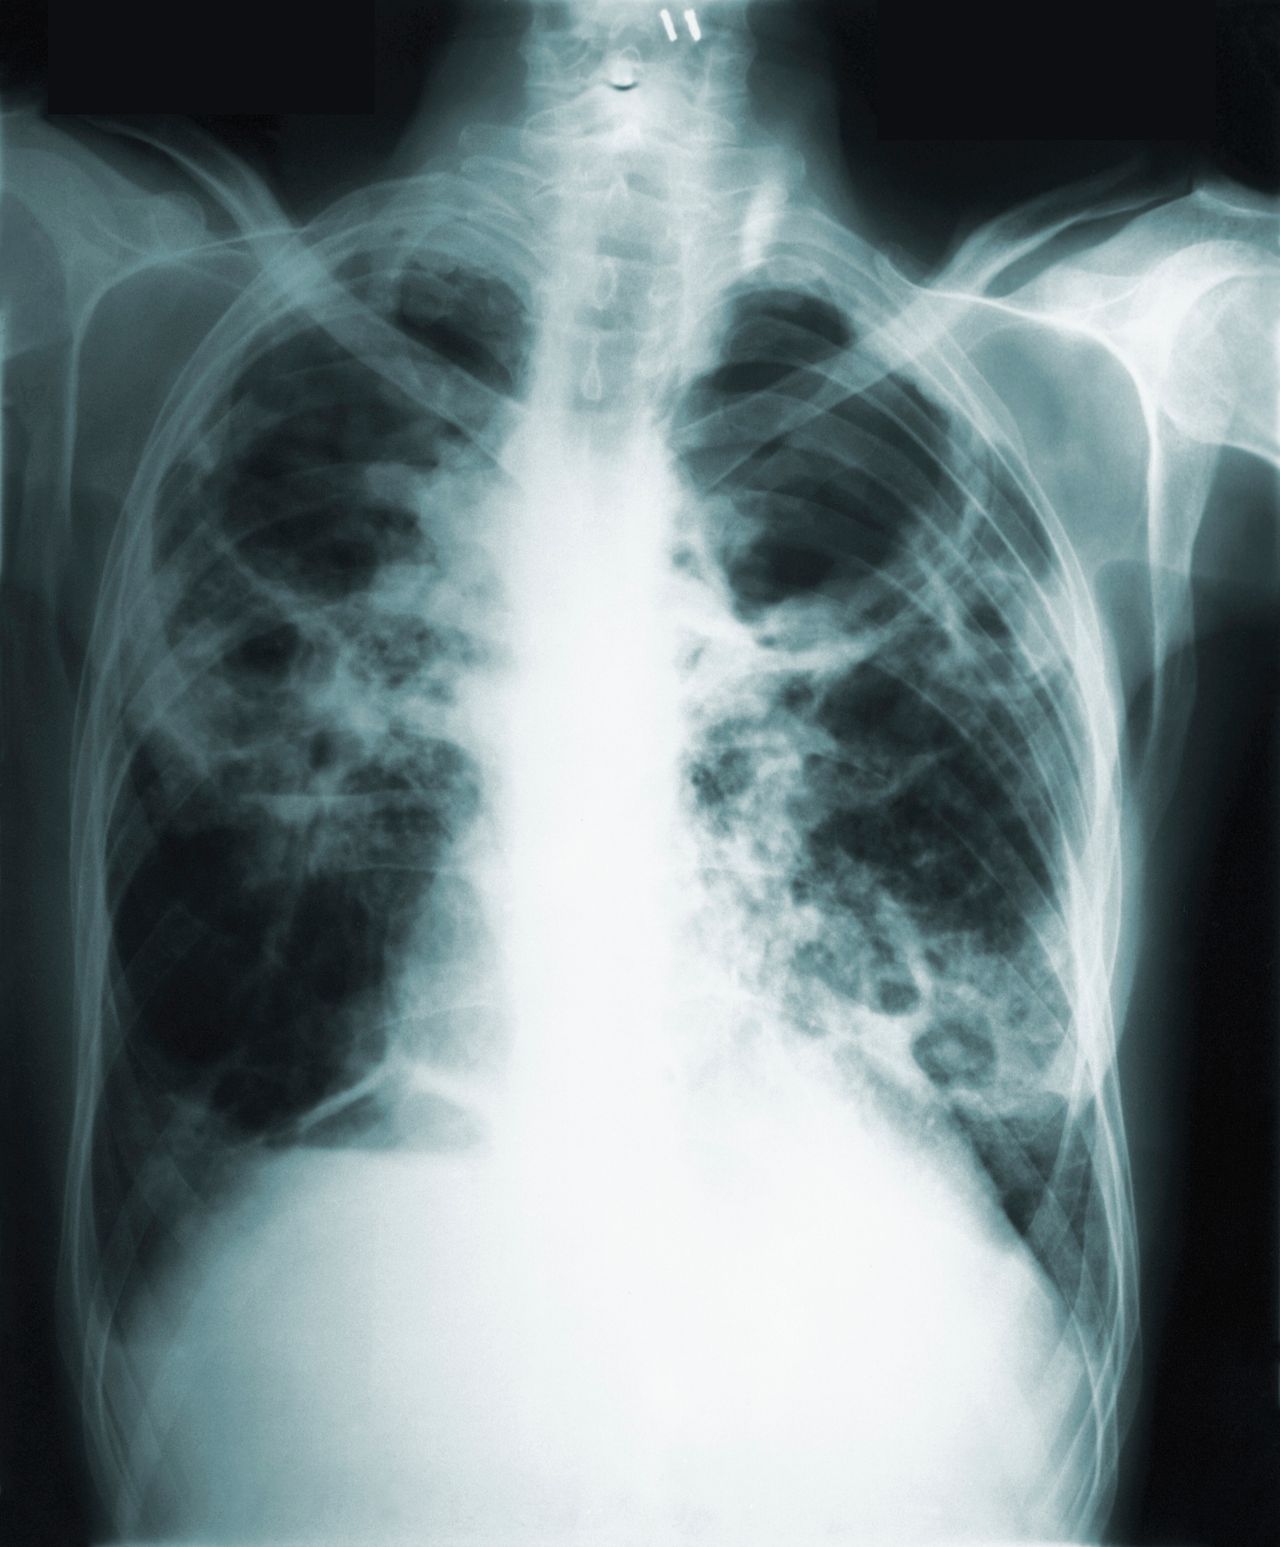 This 1966 image made available by the Centers of Disease Control and Prevention shows a chest x-ray of a tuberculosis patient.